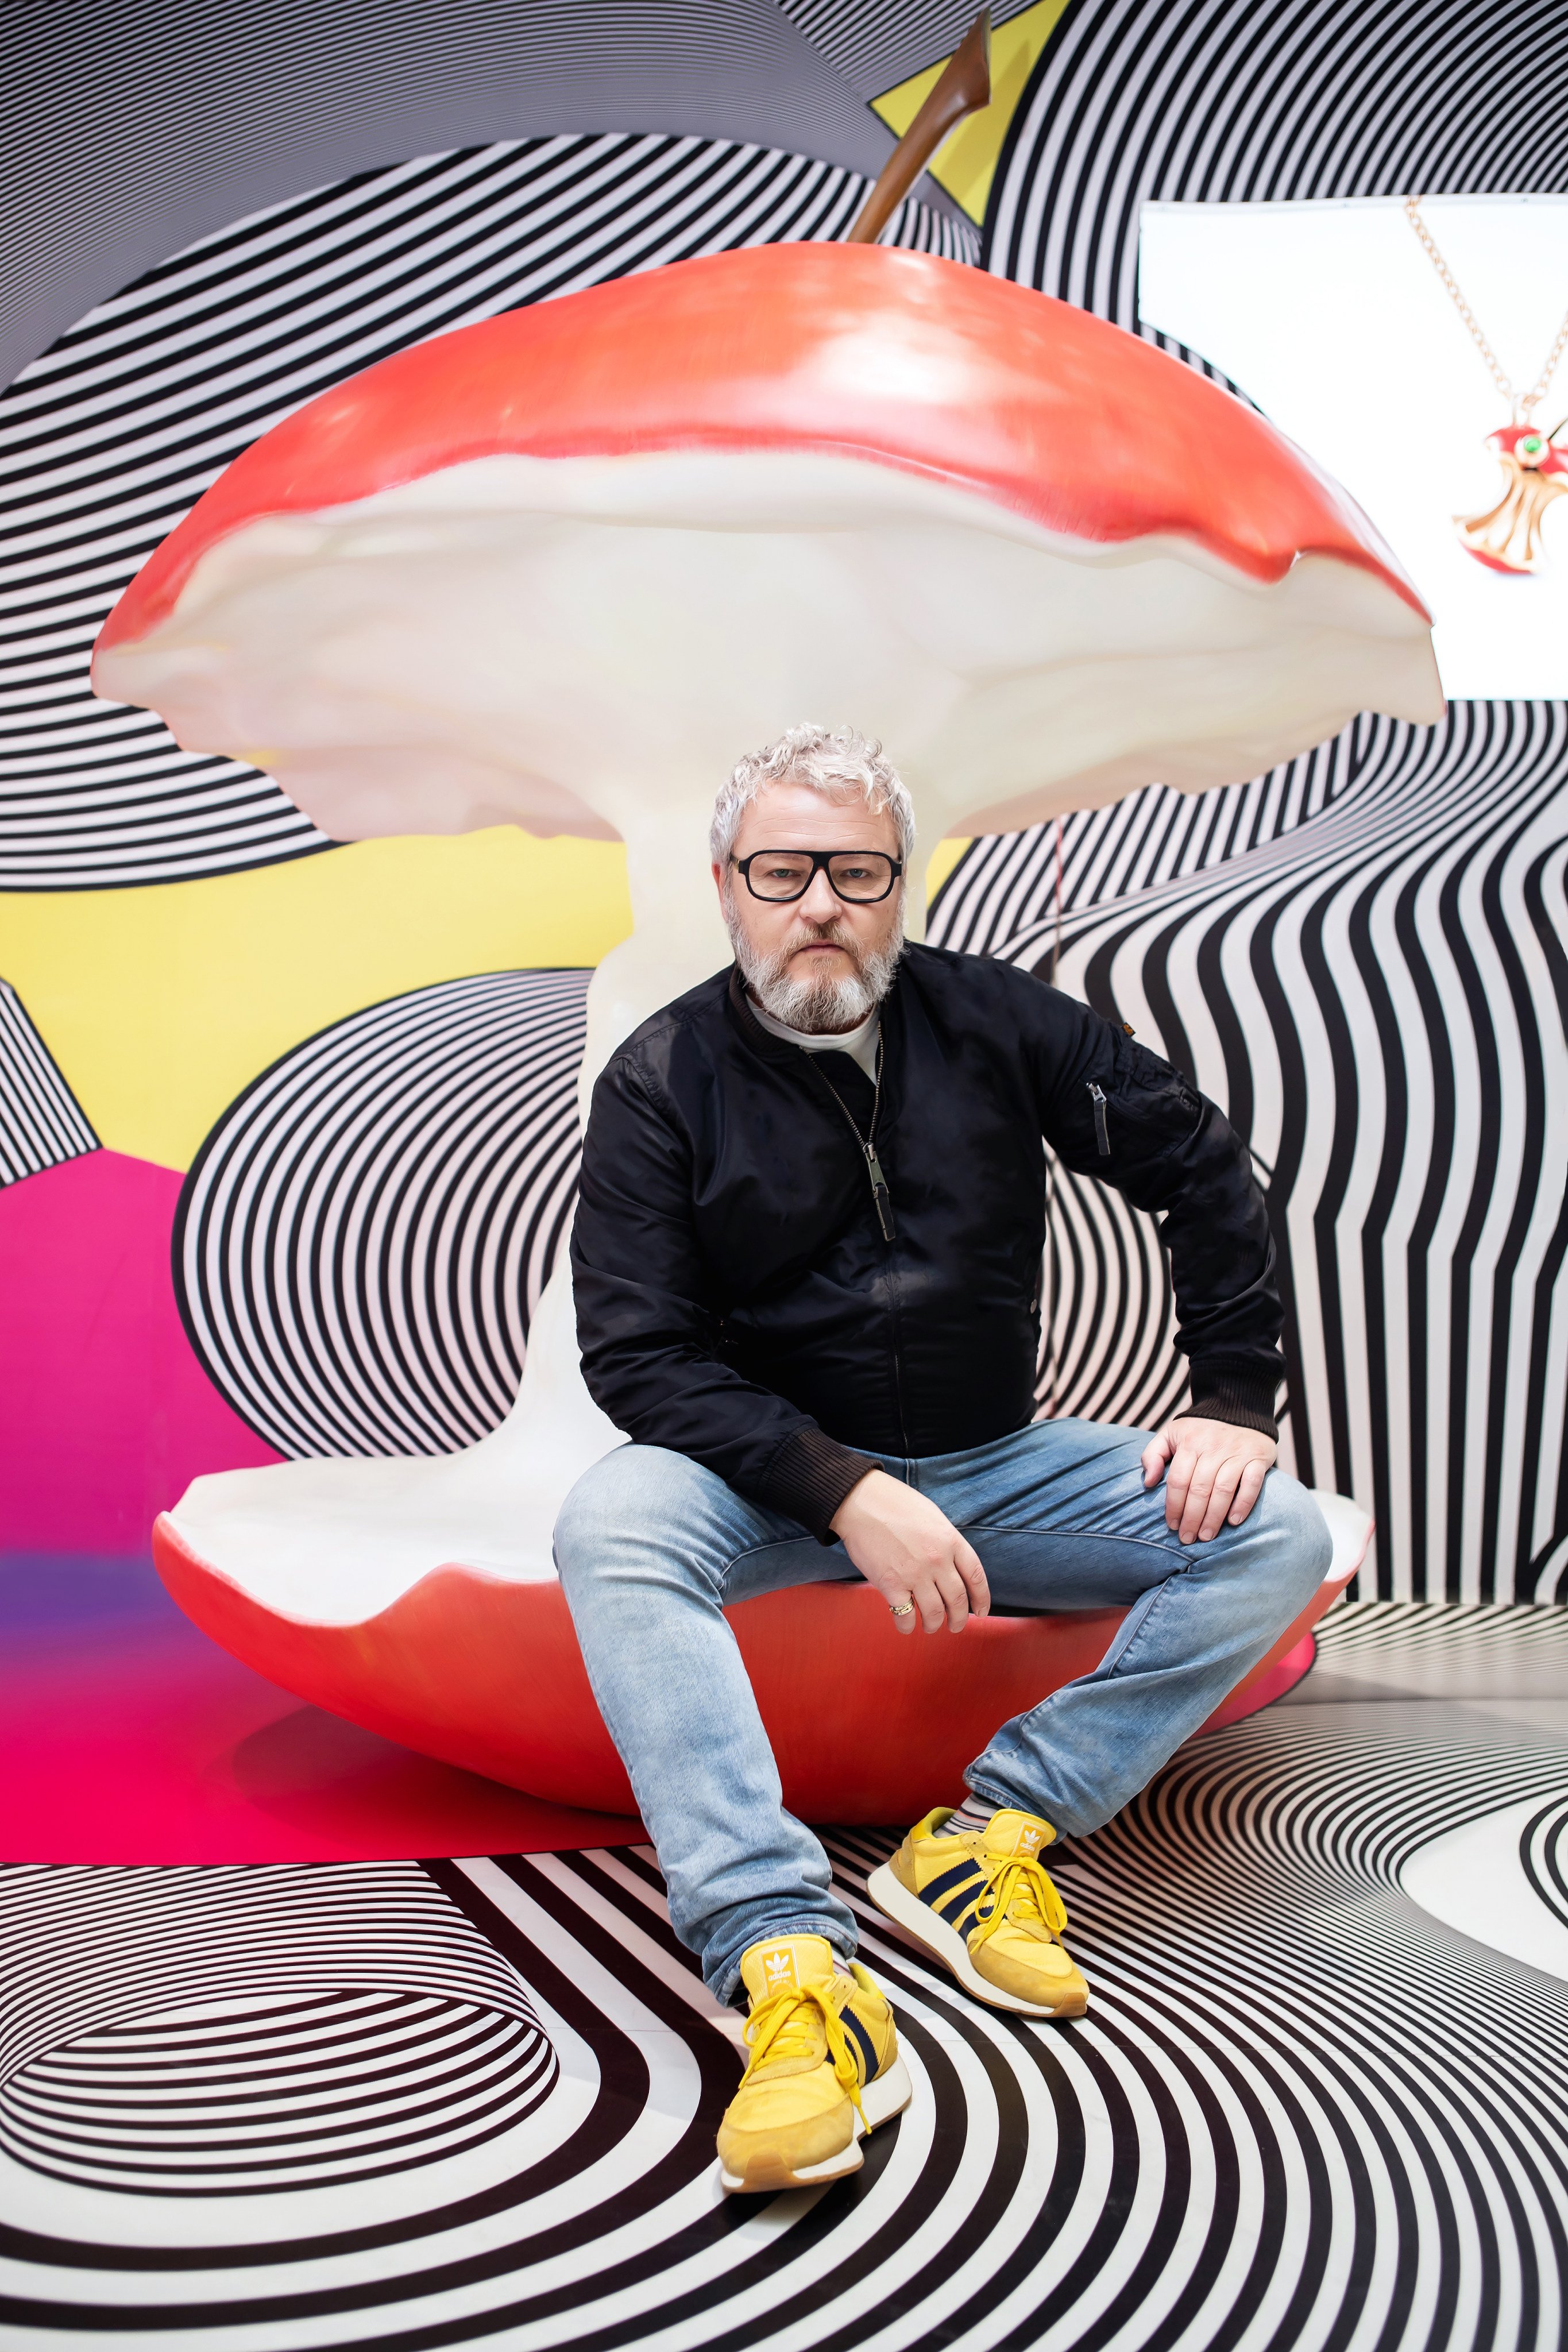 German sculptor and artist Tobias Rehberger likes to explore what art is and how it differs from design. Photo: Galleria Continua